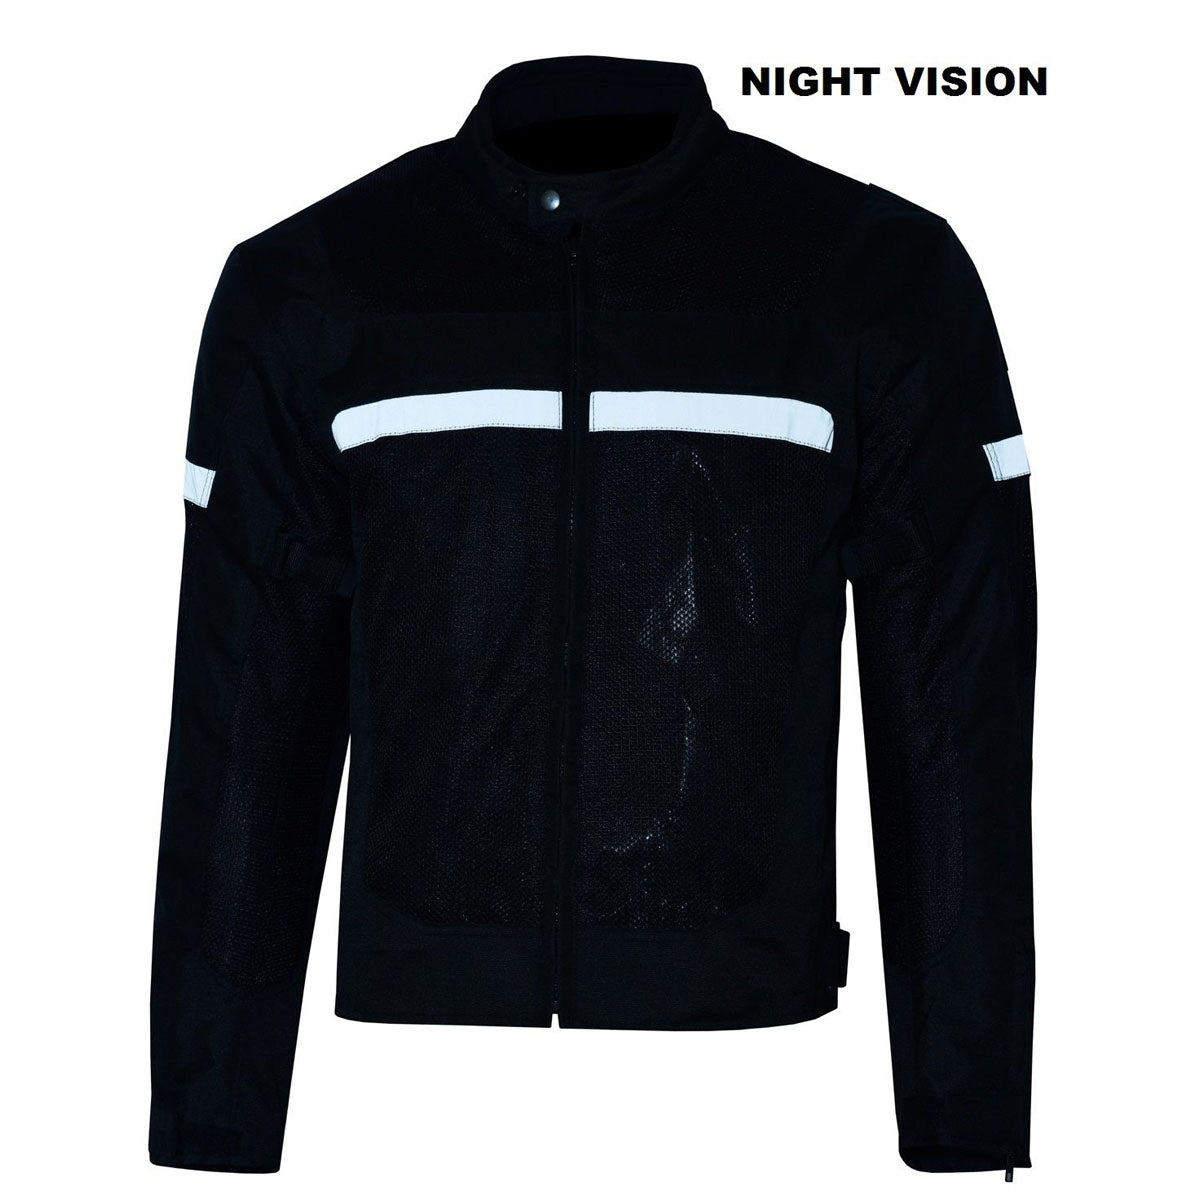 Mens Motorcycle Perforated Textile Reflective Mesh Riding Jacket